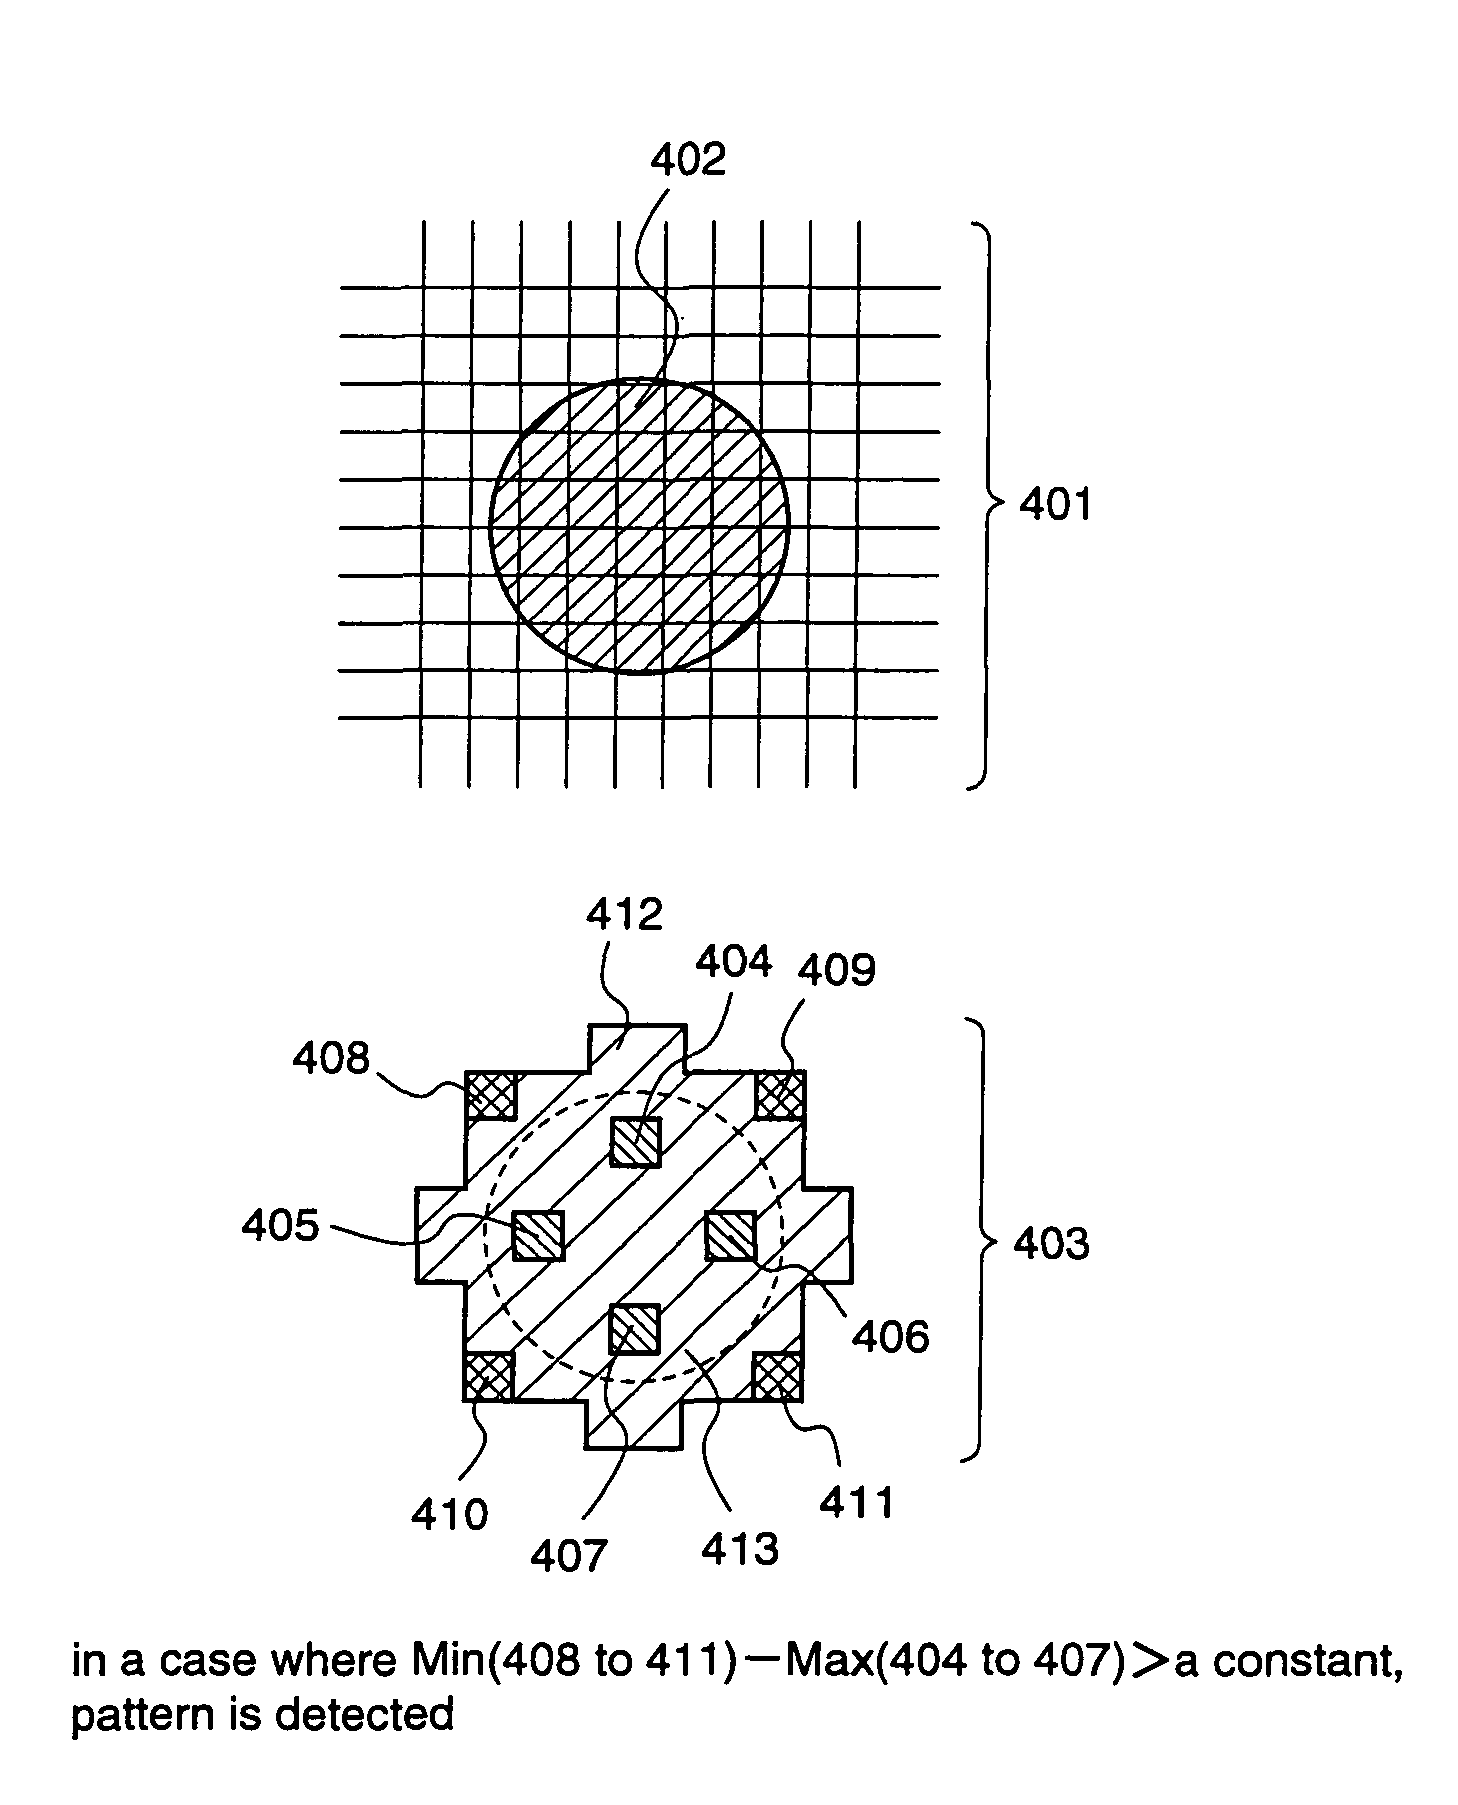 Image recognition method and image recognition apparatus